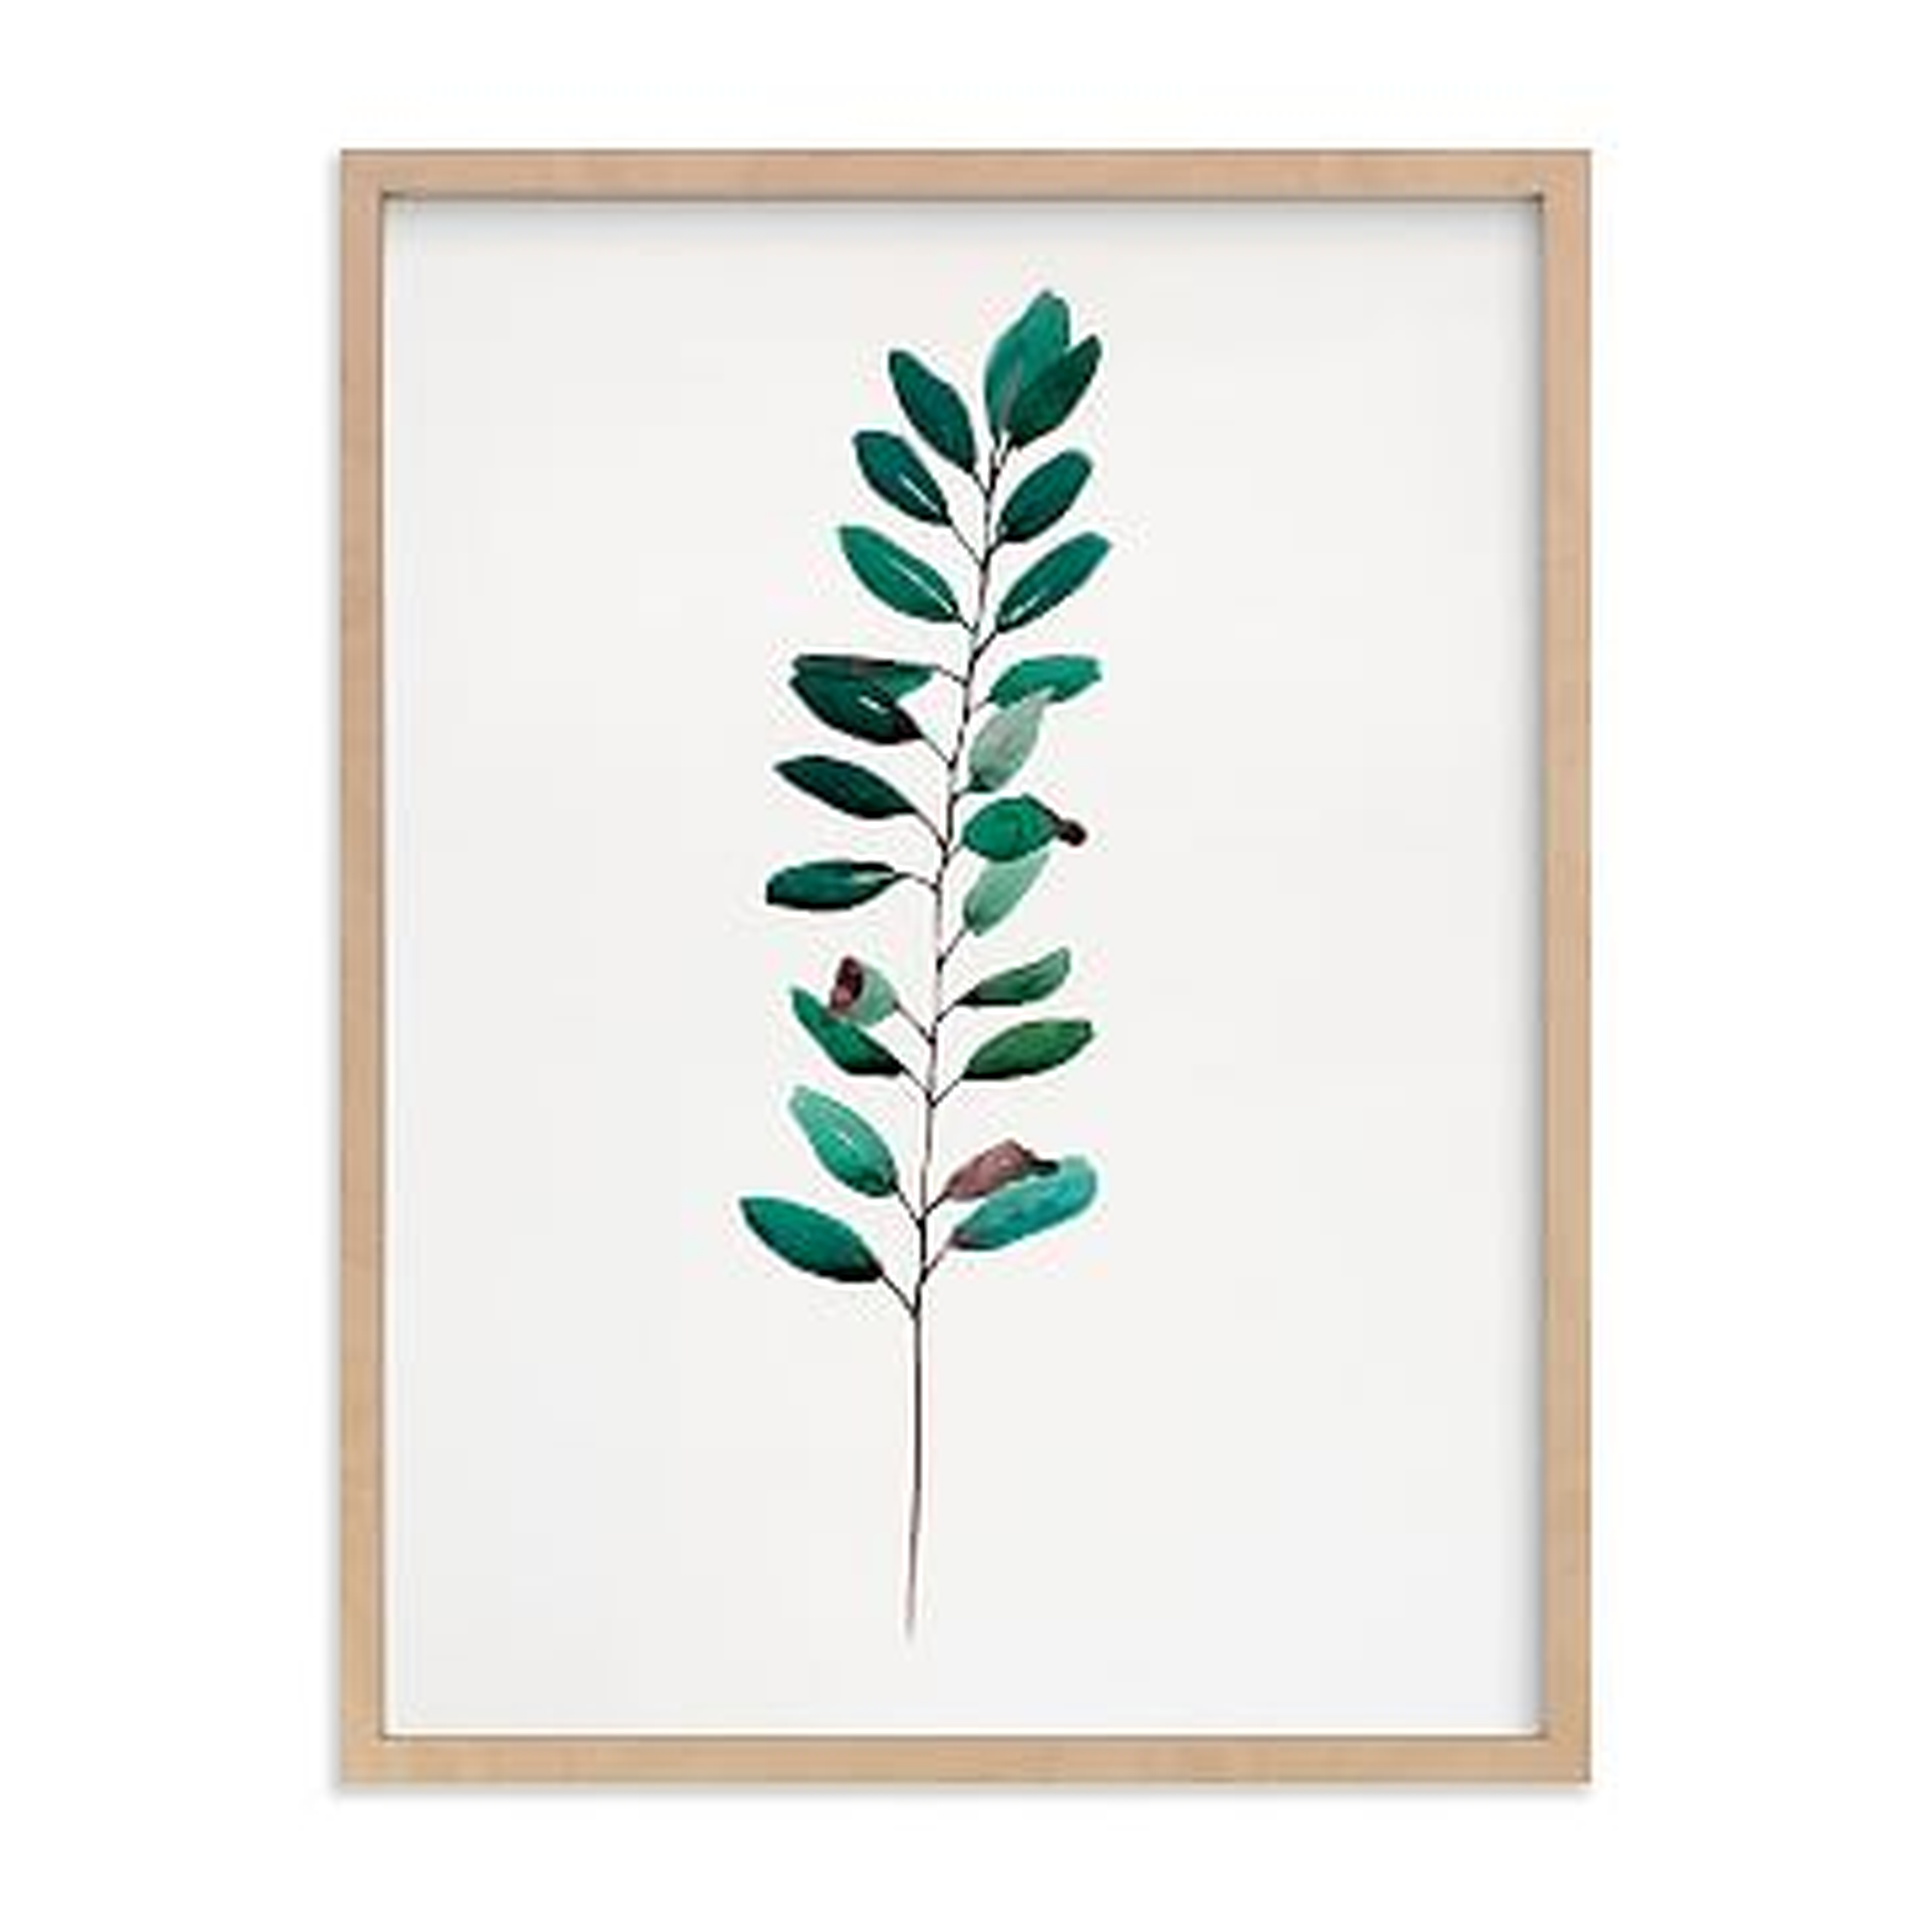 Curry Tree, Full Bleed 18"x24", Natural Wood Frame - West Elm